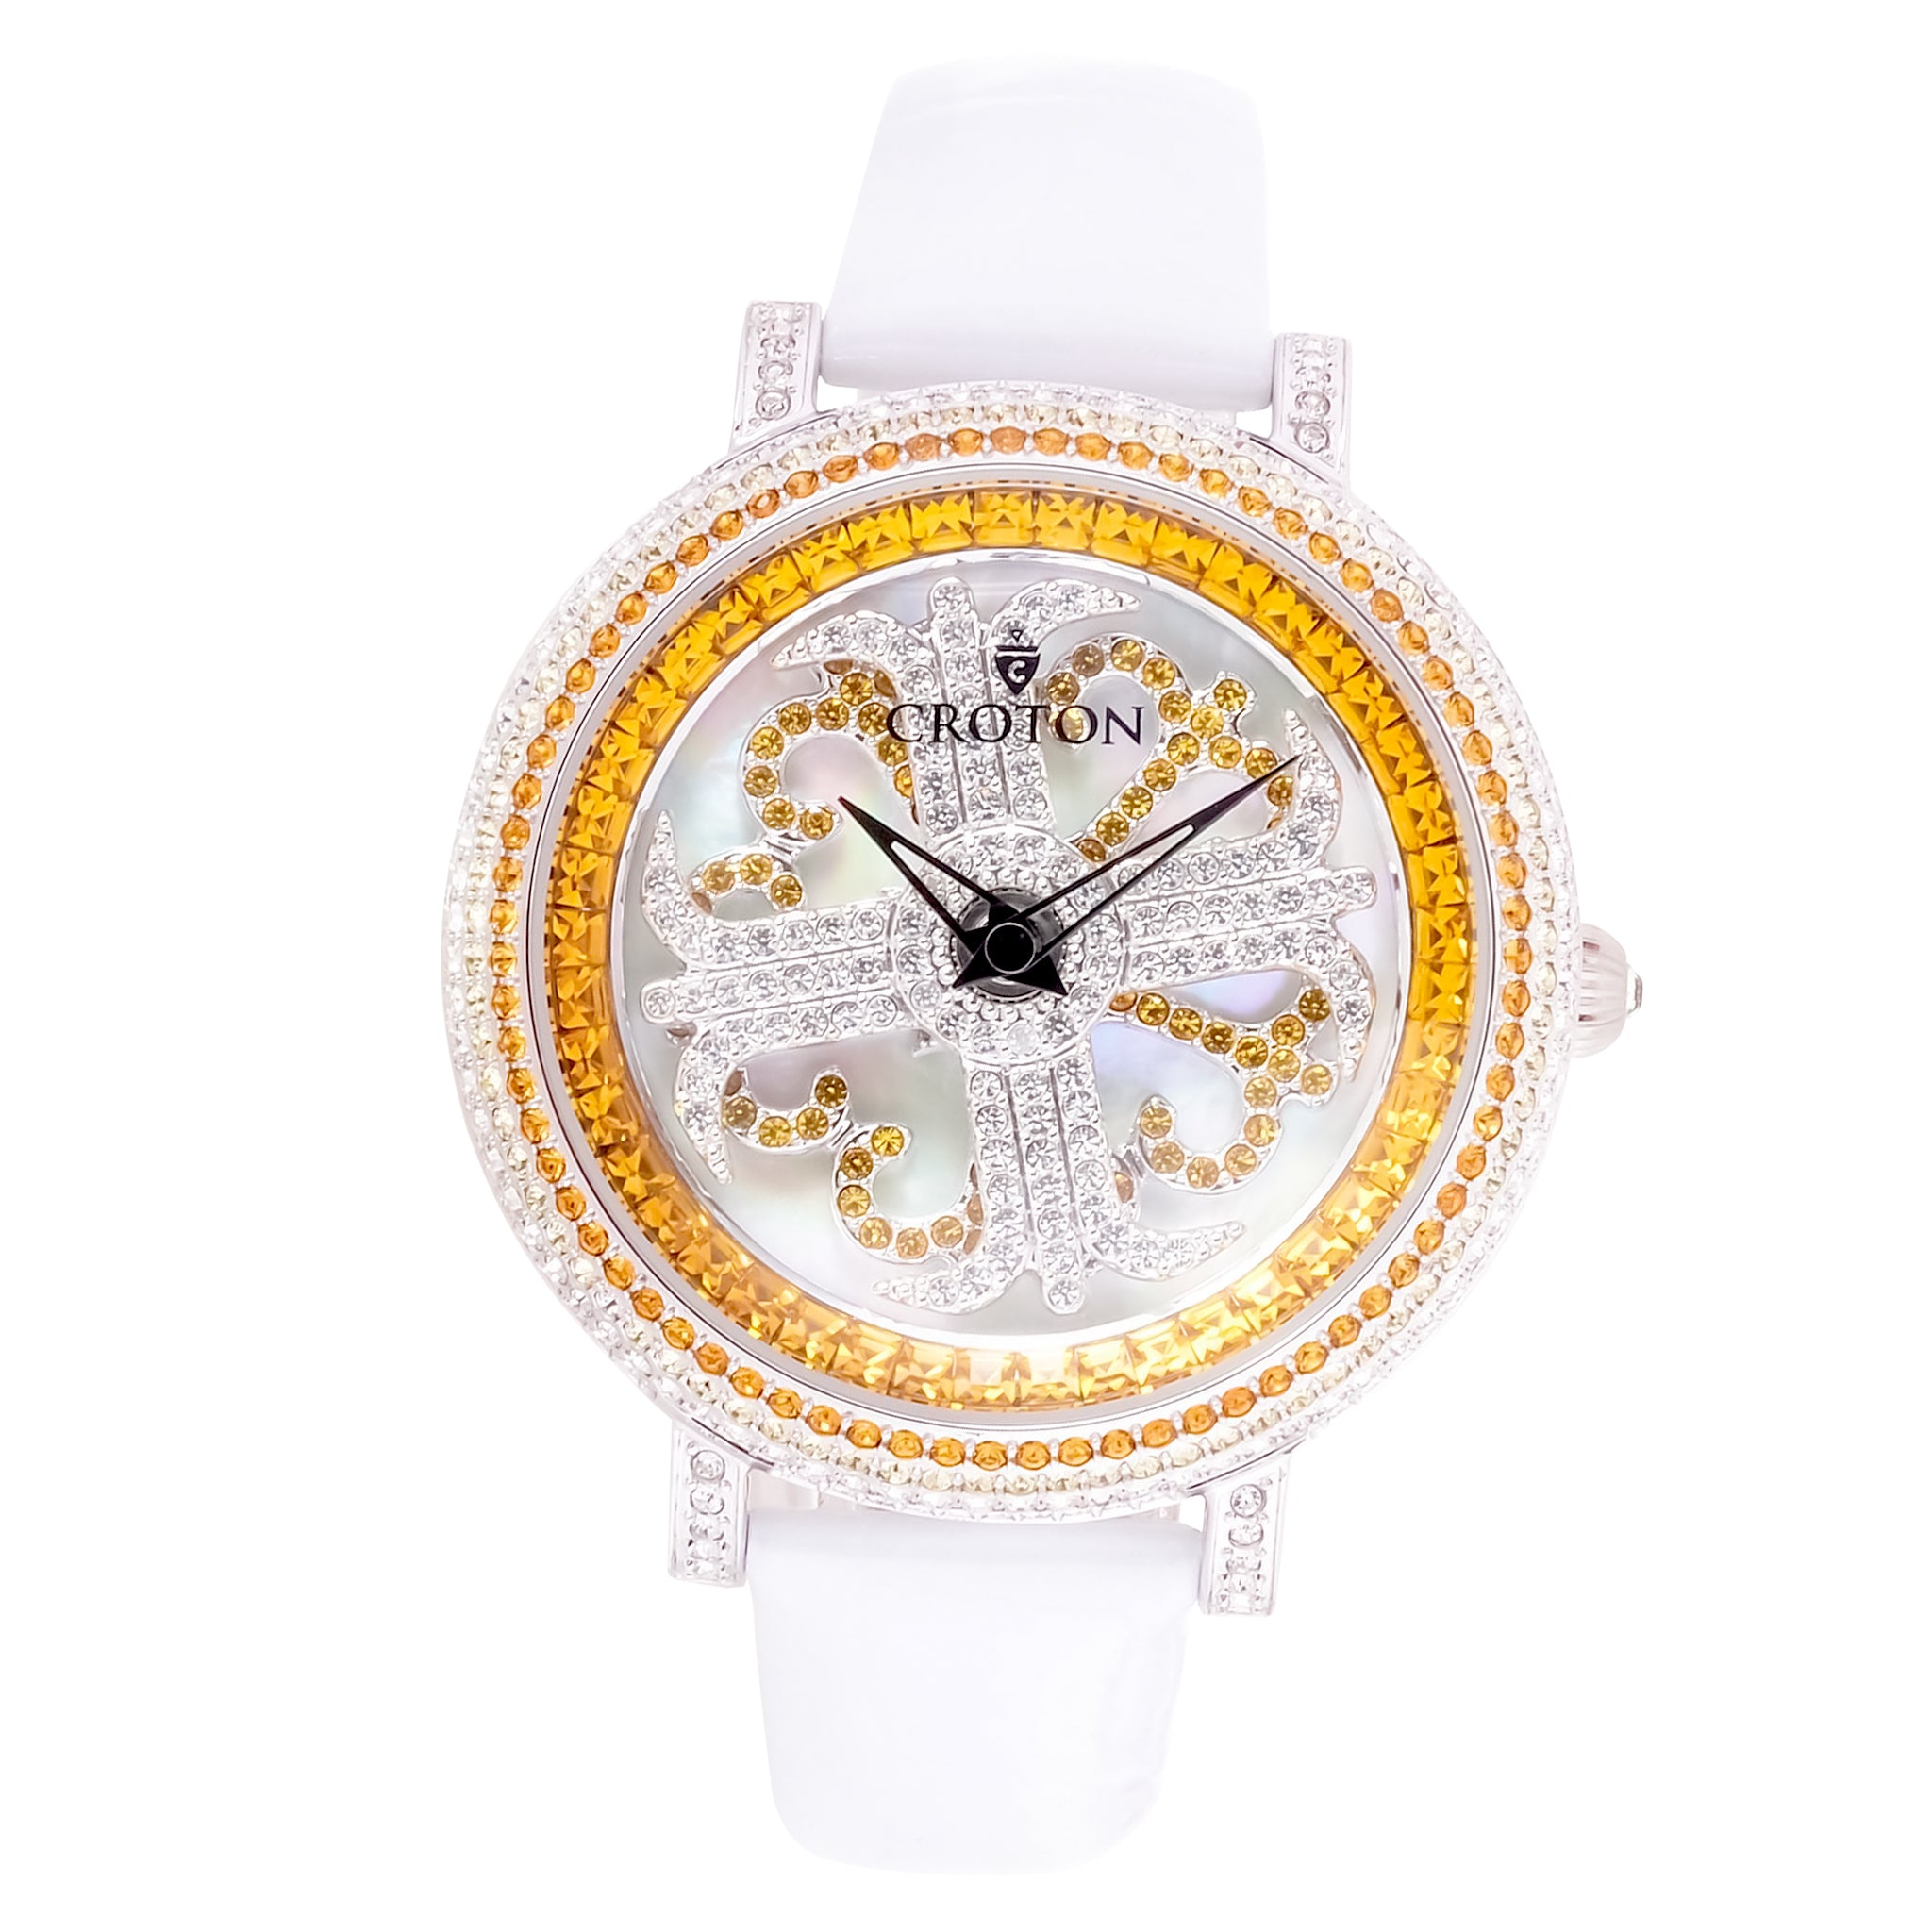 Ladies Topaz Colored Crystals Spinning Dial Watch with Leather Strap